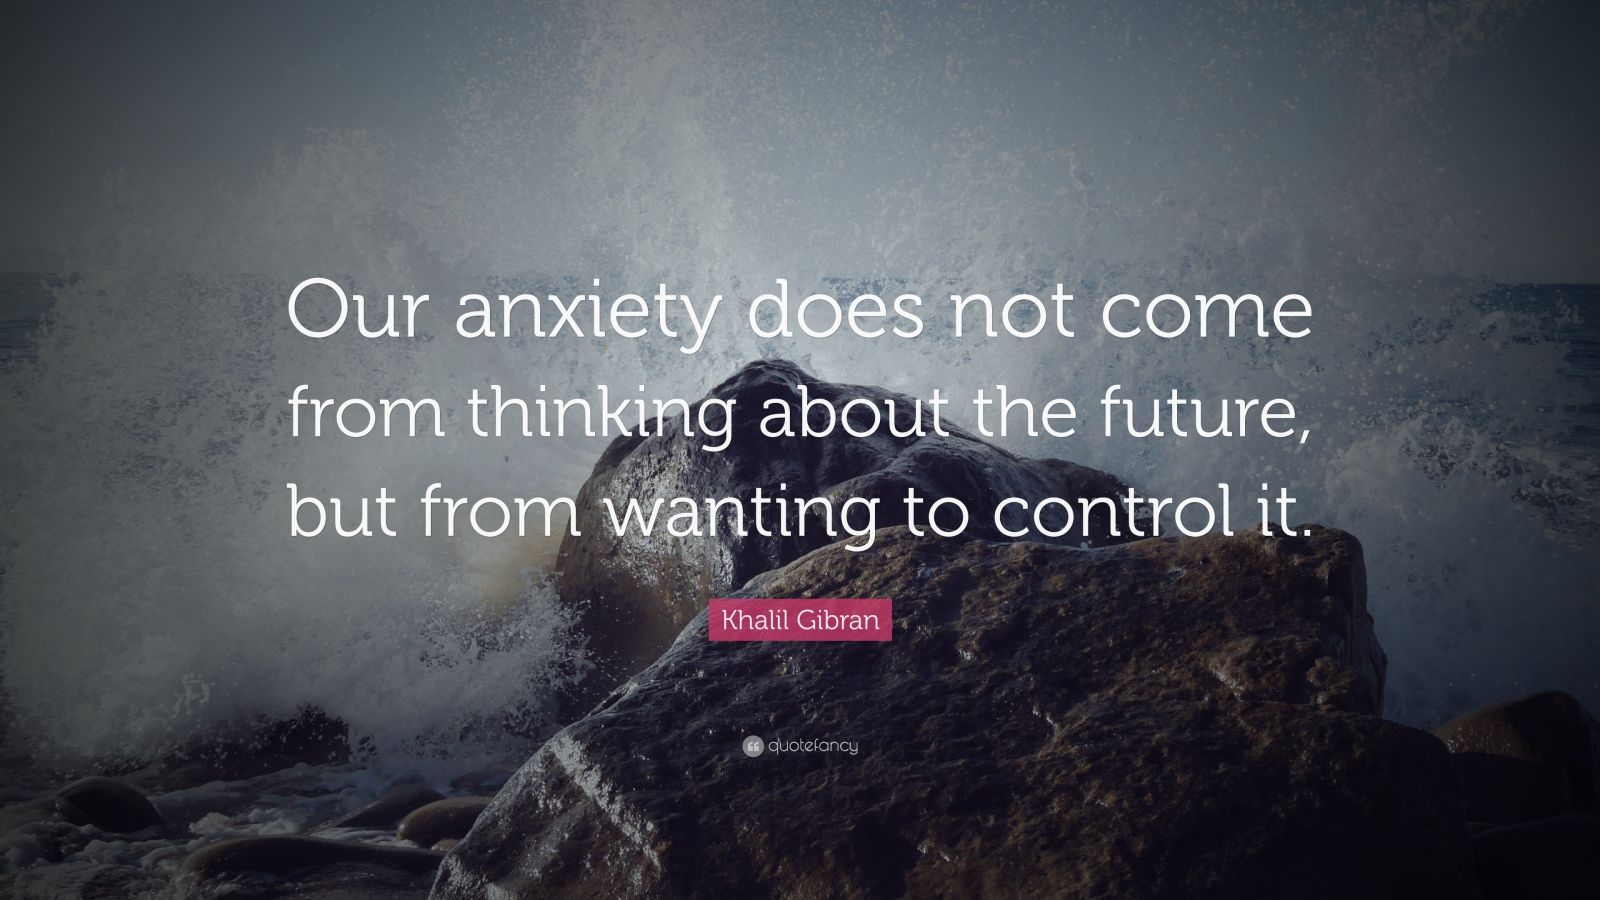 101300 Khalil Gibran Quote Our anxiety does not come from thinking about